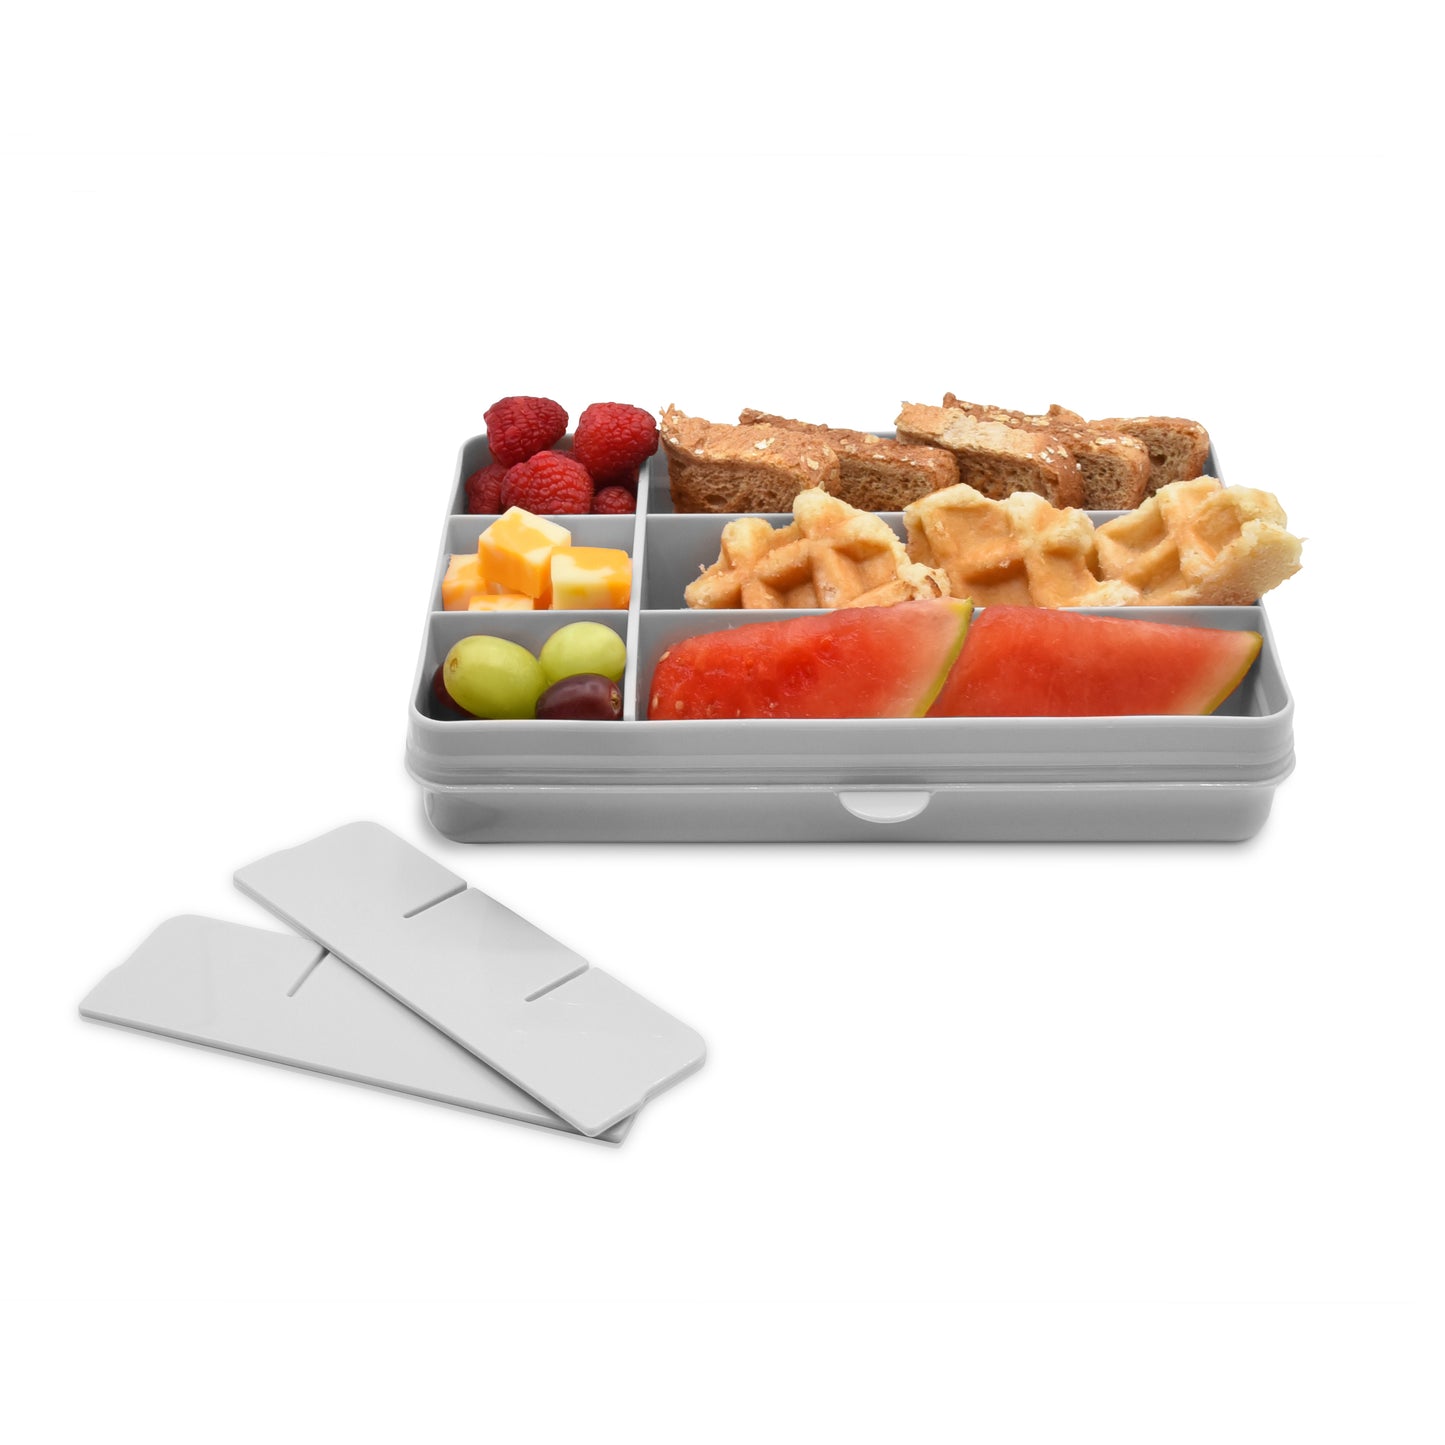 melii Snackle Box Grey - 12 Compartment Snack Container with Removable Dividers for Customizable Storage - Ideal for On the Go Snacking, BPA Free, Easy to Open and Clean